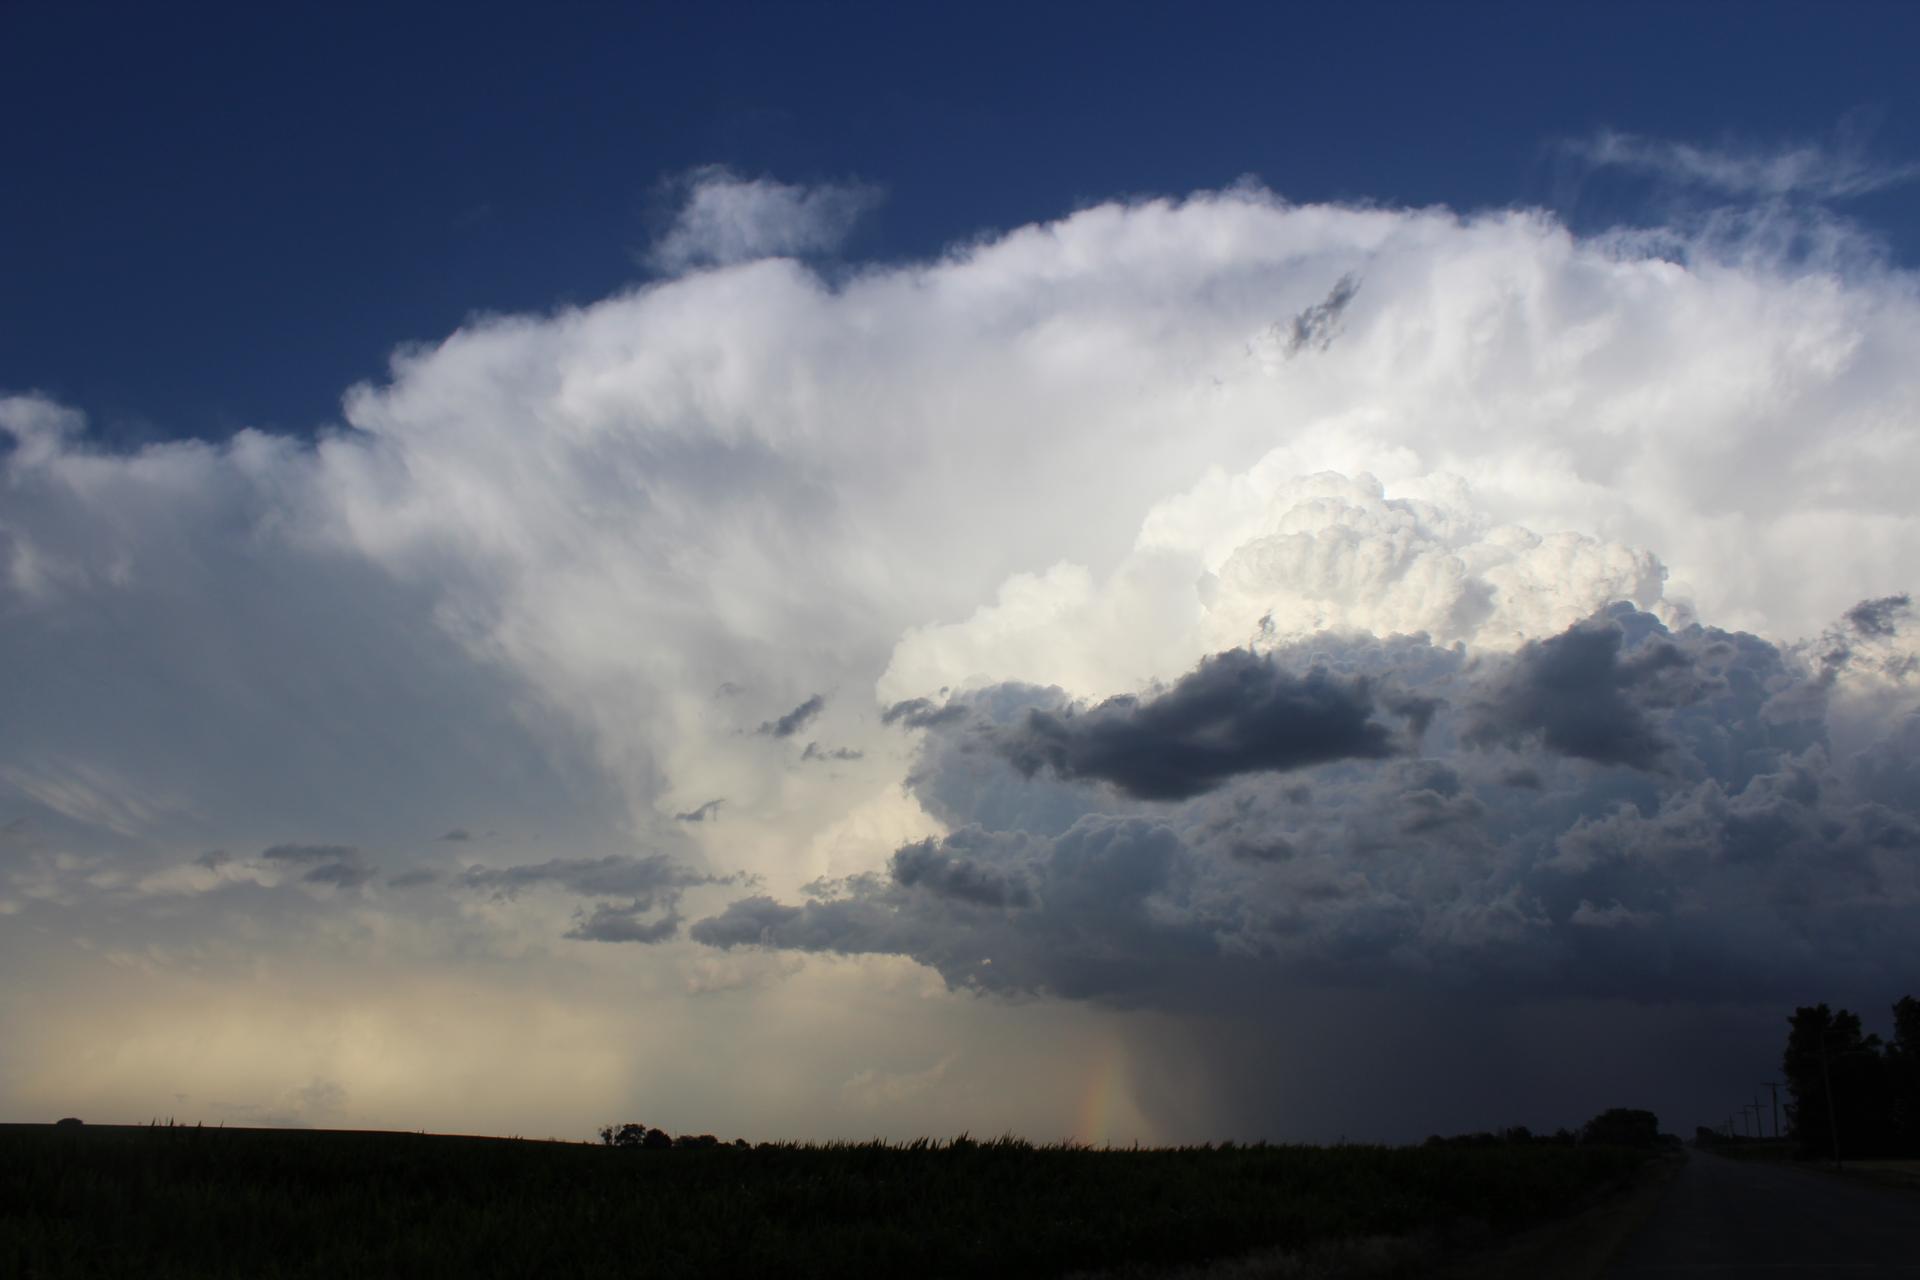 Image of a supercell thunderstorm towering over a road